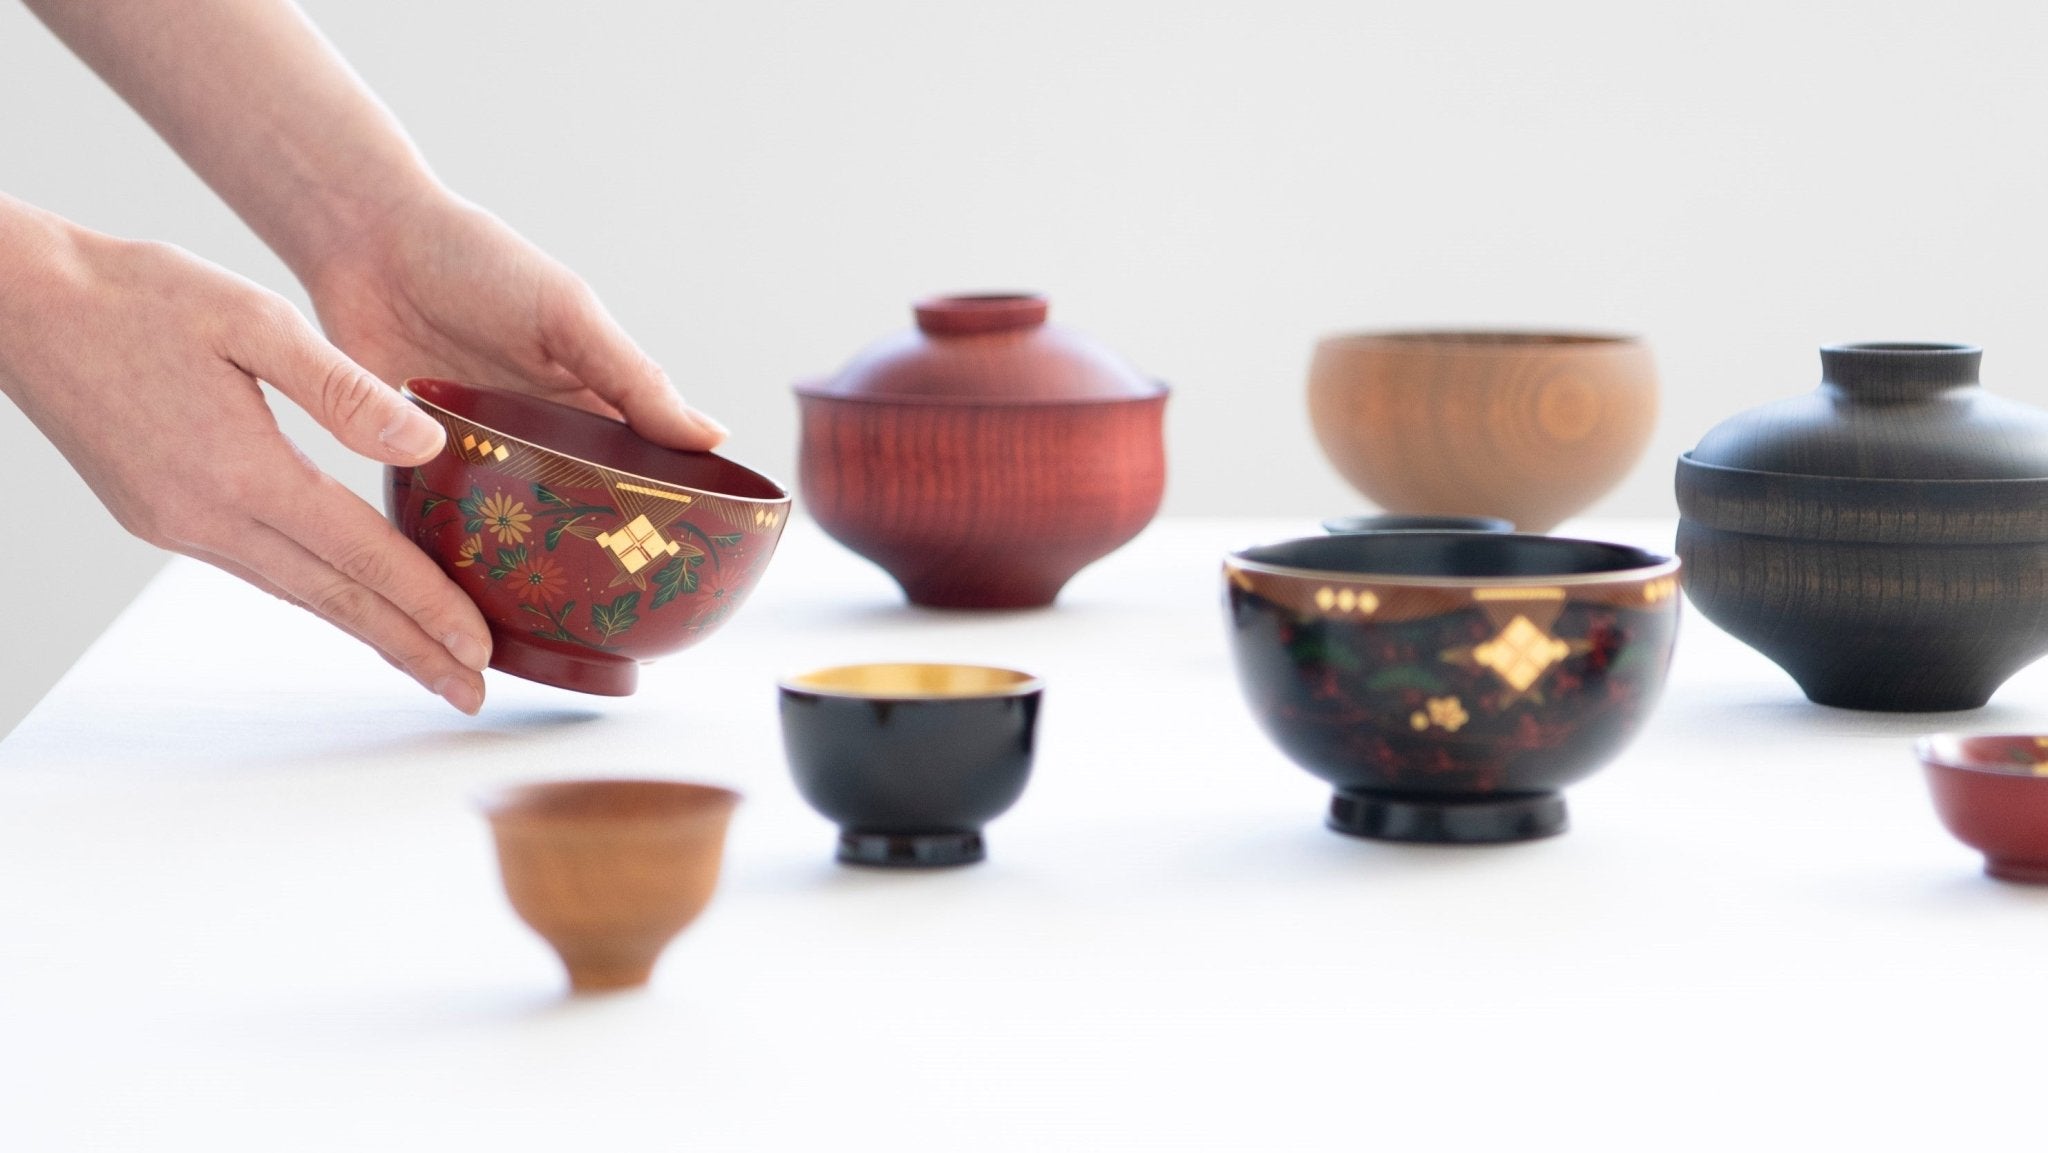 How to Care for Japanese Lacquerware